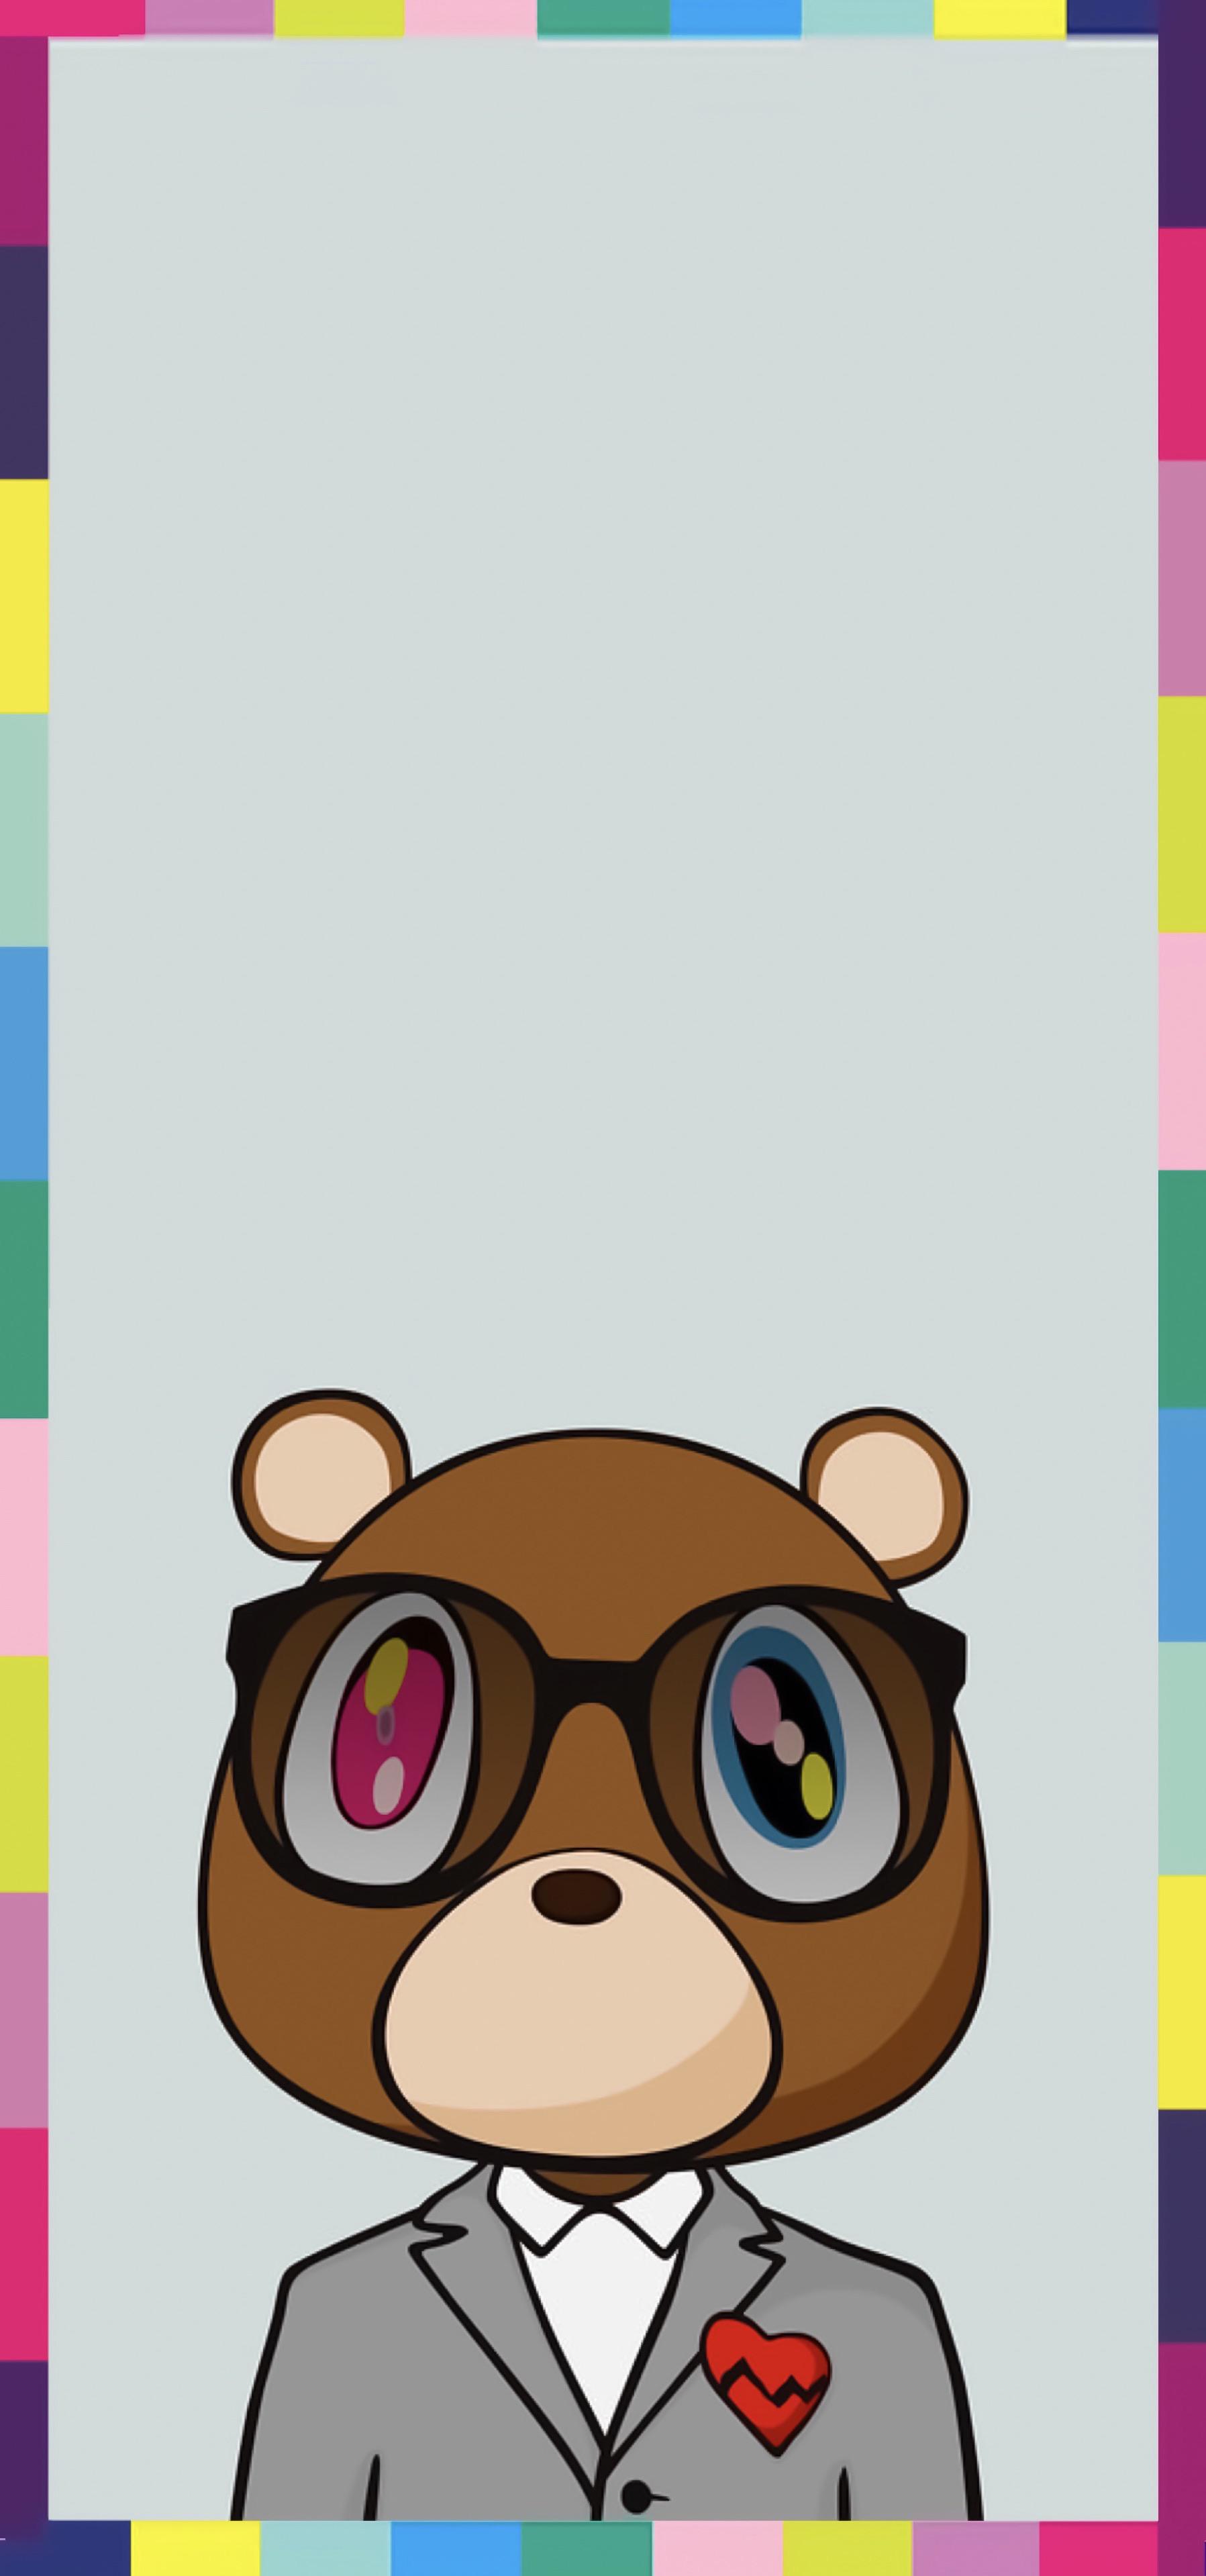 808s & Heartbreak CUSTOM Wallpaper I put together! Made to fit the iPhone X. It's a combination of two image I found on Google.: Kanye